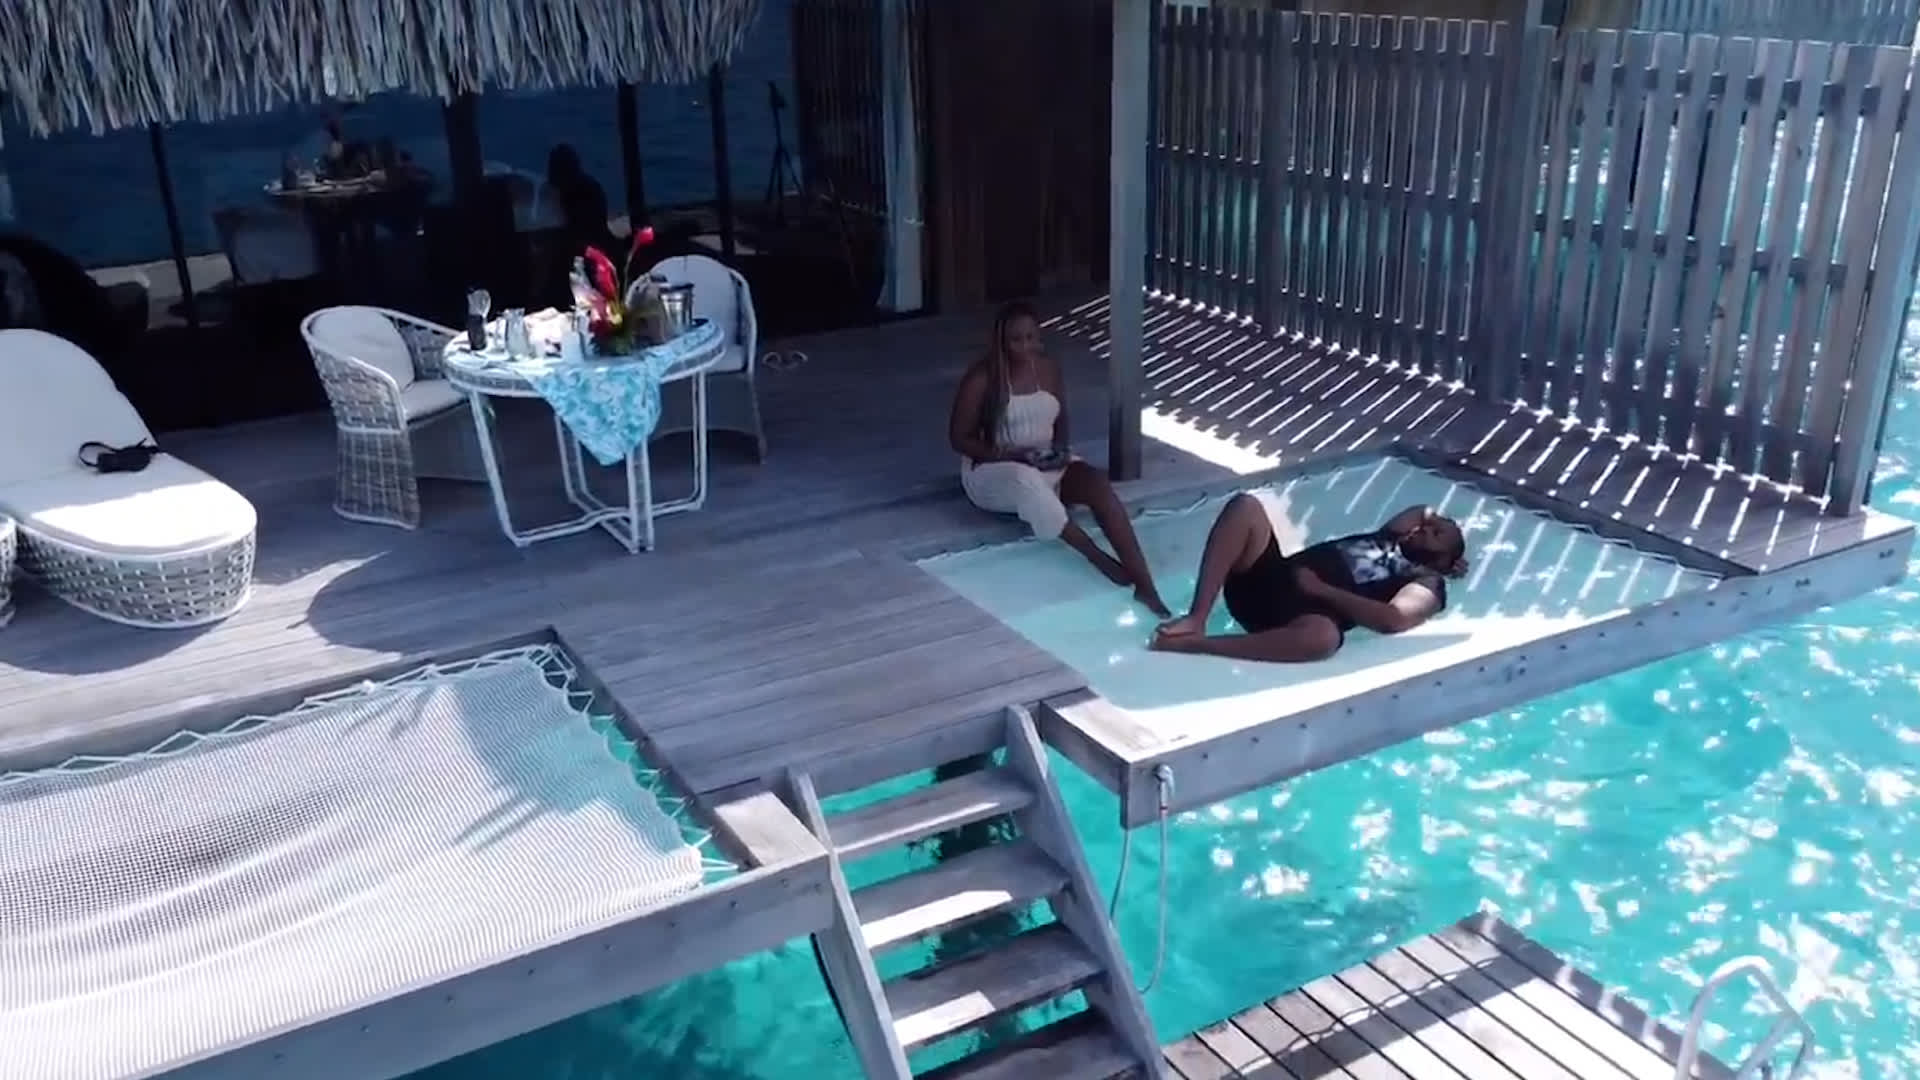 Alston and Gales relaxing in their private Conrad Nui Bora Bora villa, which cost the couple $1200 a night.